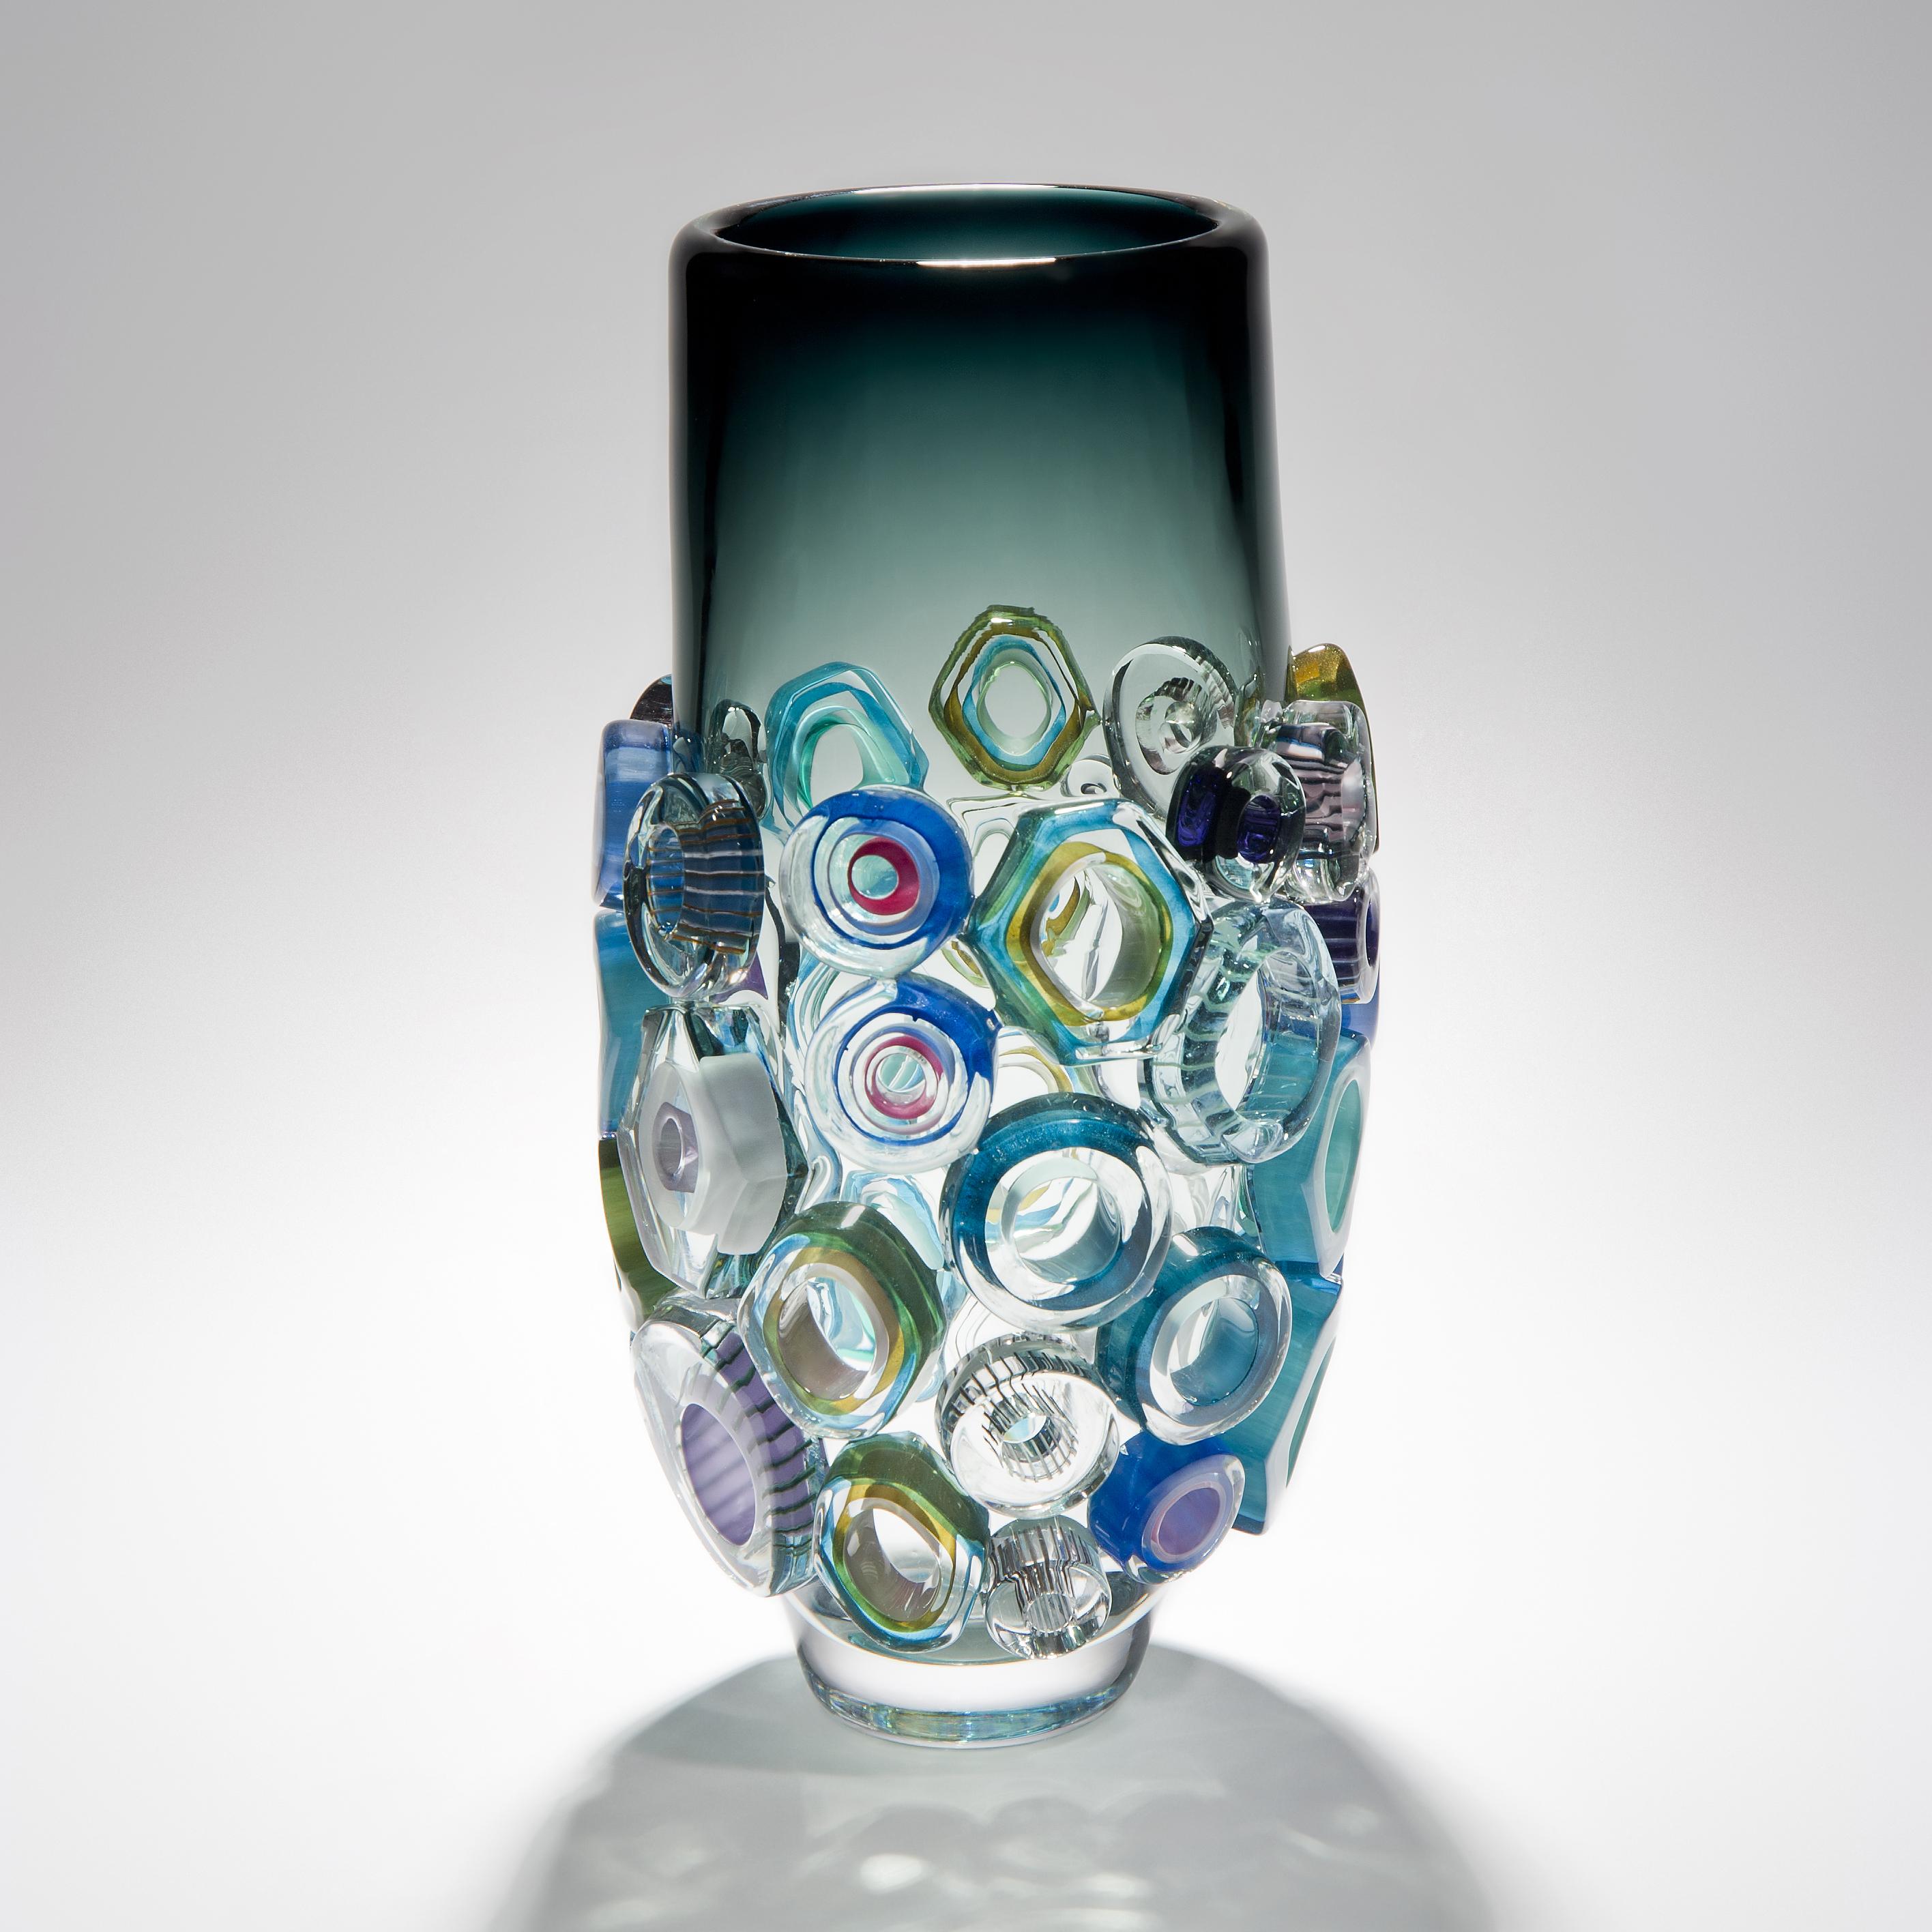 Bright field high shape with green diamonds is a unique hand blown and crafted vase by the German artist, Sabine Lintzen. The initial inner form is free-blown and adorned with various individually shaped murrini, all created in a mix coloured glass